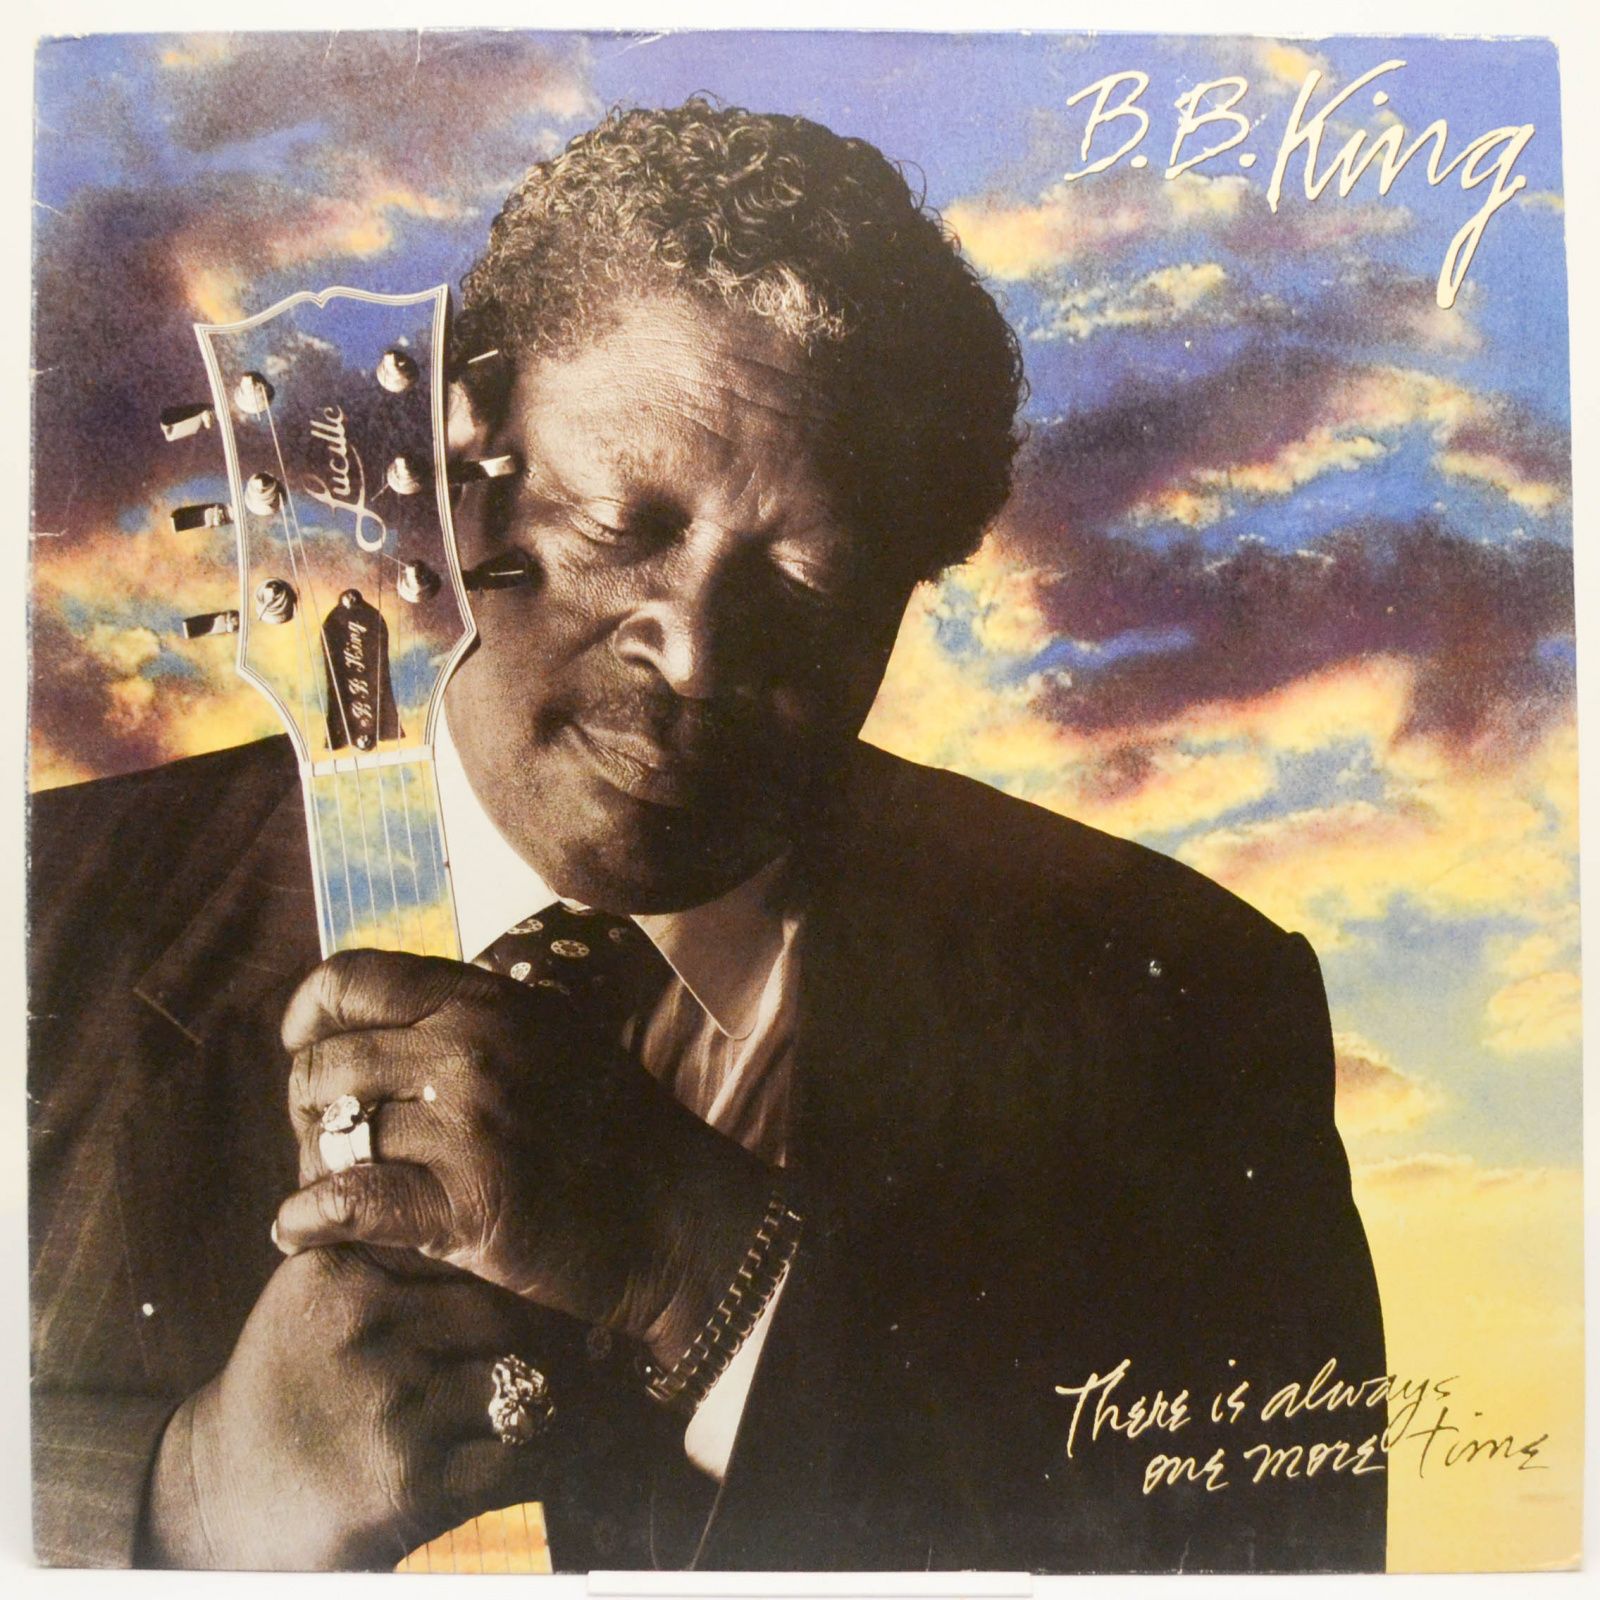 B.B. King — There Is Always One More Time, 1991